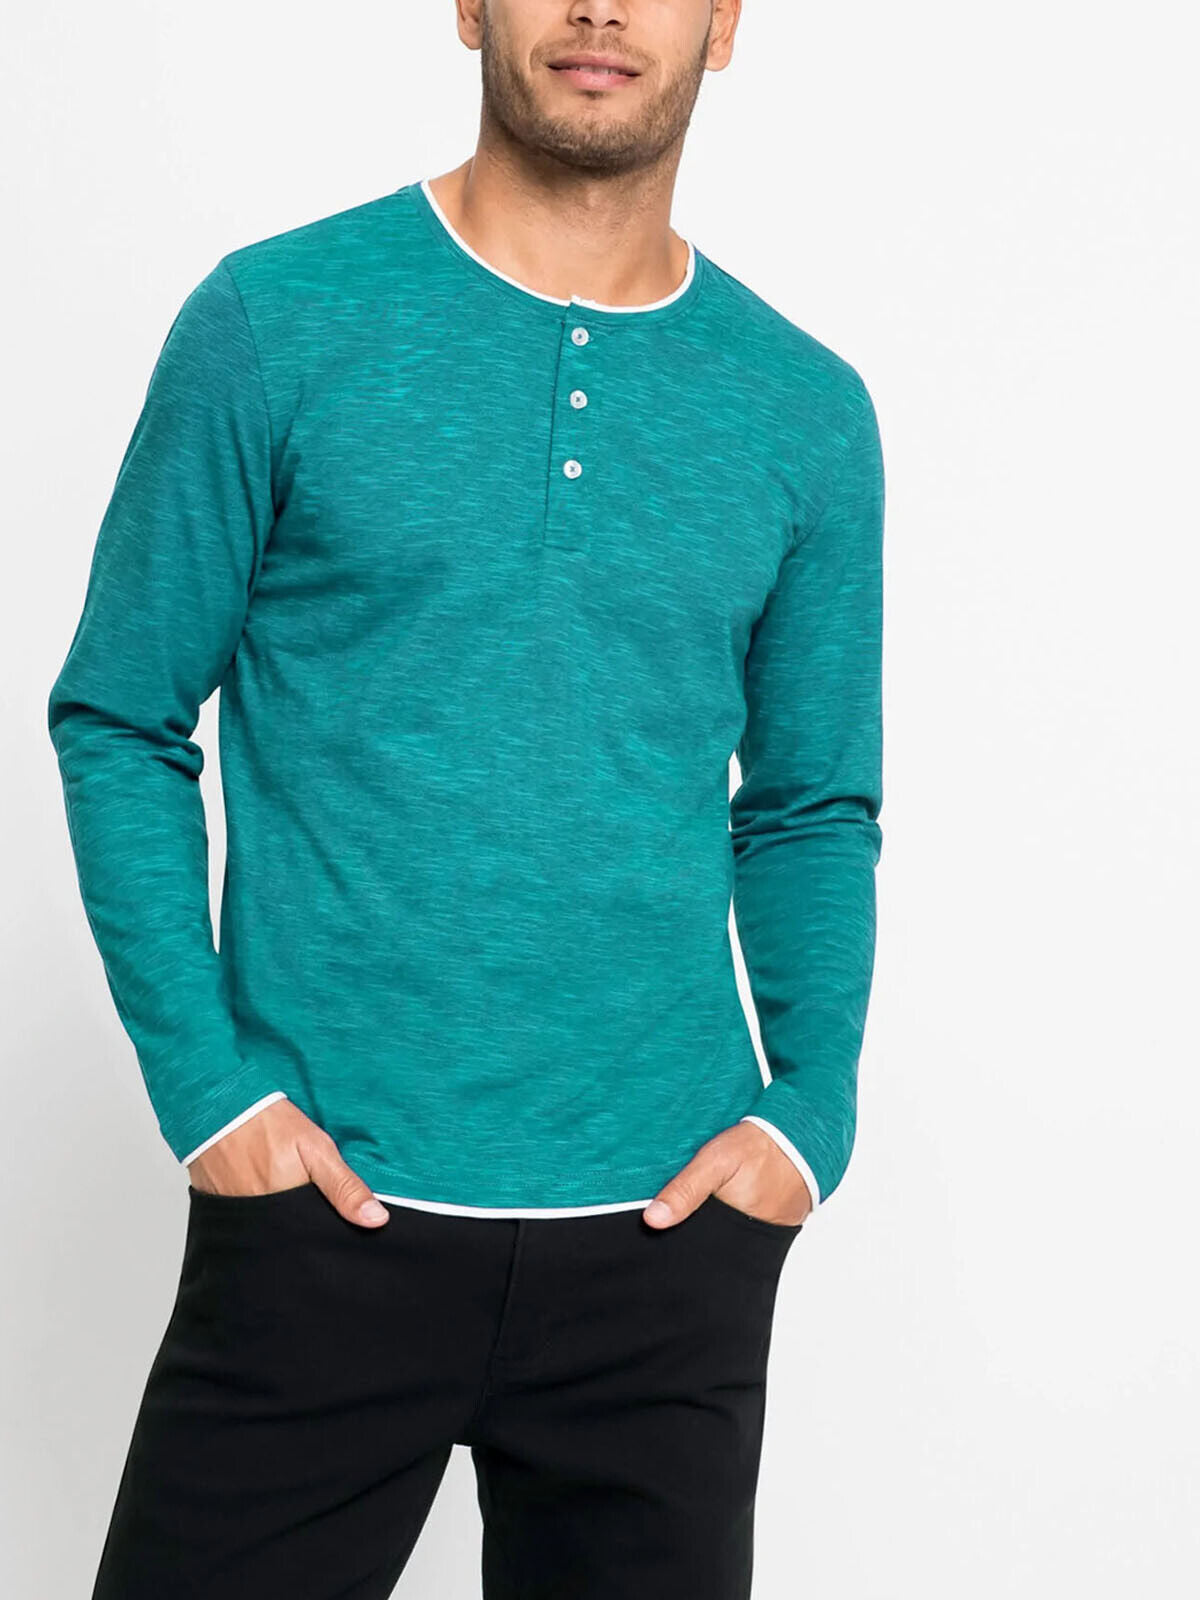 BPC Green Mens Pure Cotton Henley Neck Long Sleeve T-Shirt Sizes M or L